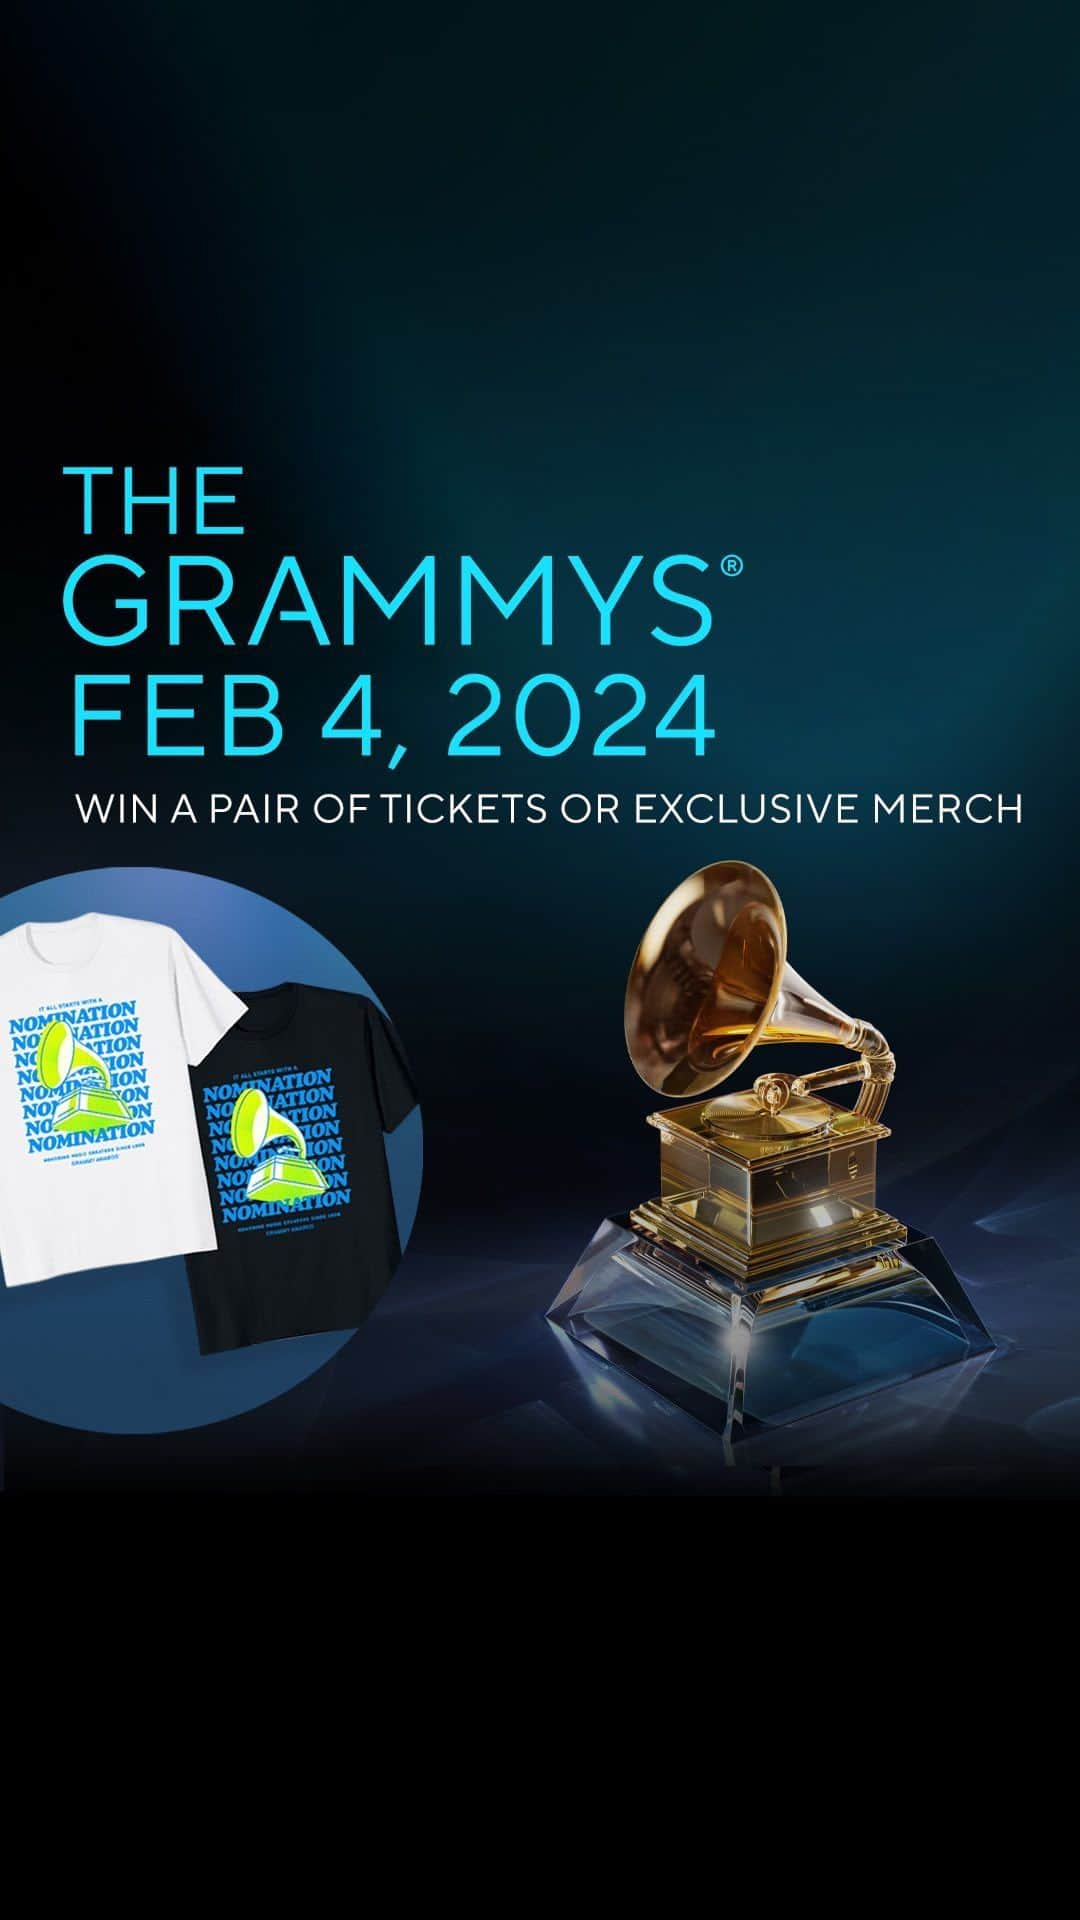 The GRAMMYsのインスタグラム：「🎶 Win a pair of tickets to the GRAMMY Awards or exclusive merch!  ✨ Five lucky winners will receive a pair of tickets to the the #GRAMMYs on Feb.4, 2024 at @cryptocomarena in Los Angeles. ✨ Additionally, ten winners will also be chosen to receive $100 worth of exclusive GRAMMY merch.  ↪️ Here’s how to enter: 1️⃣. Enter the giveaway at the link in our bio. 2️⃣. Opt-in to the GRAMMY.com newsletter. 3️⃣. Follow @RecordingAcademy on Instagram and GRAMMYs on TikTok. 4️⃣. Tag a friend in the comments.  🌟Enter by 9 PM PT on January 30, 2024. Winners will be named and notified on Jan. 31, 2024. Good luck!」